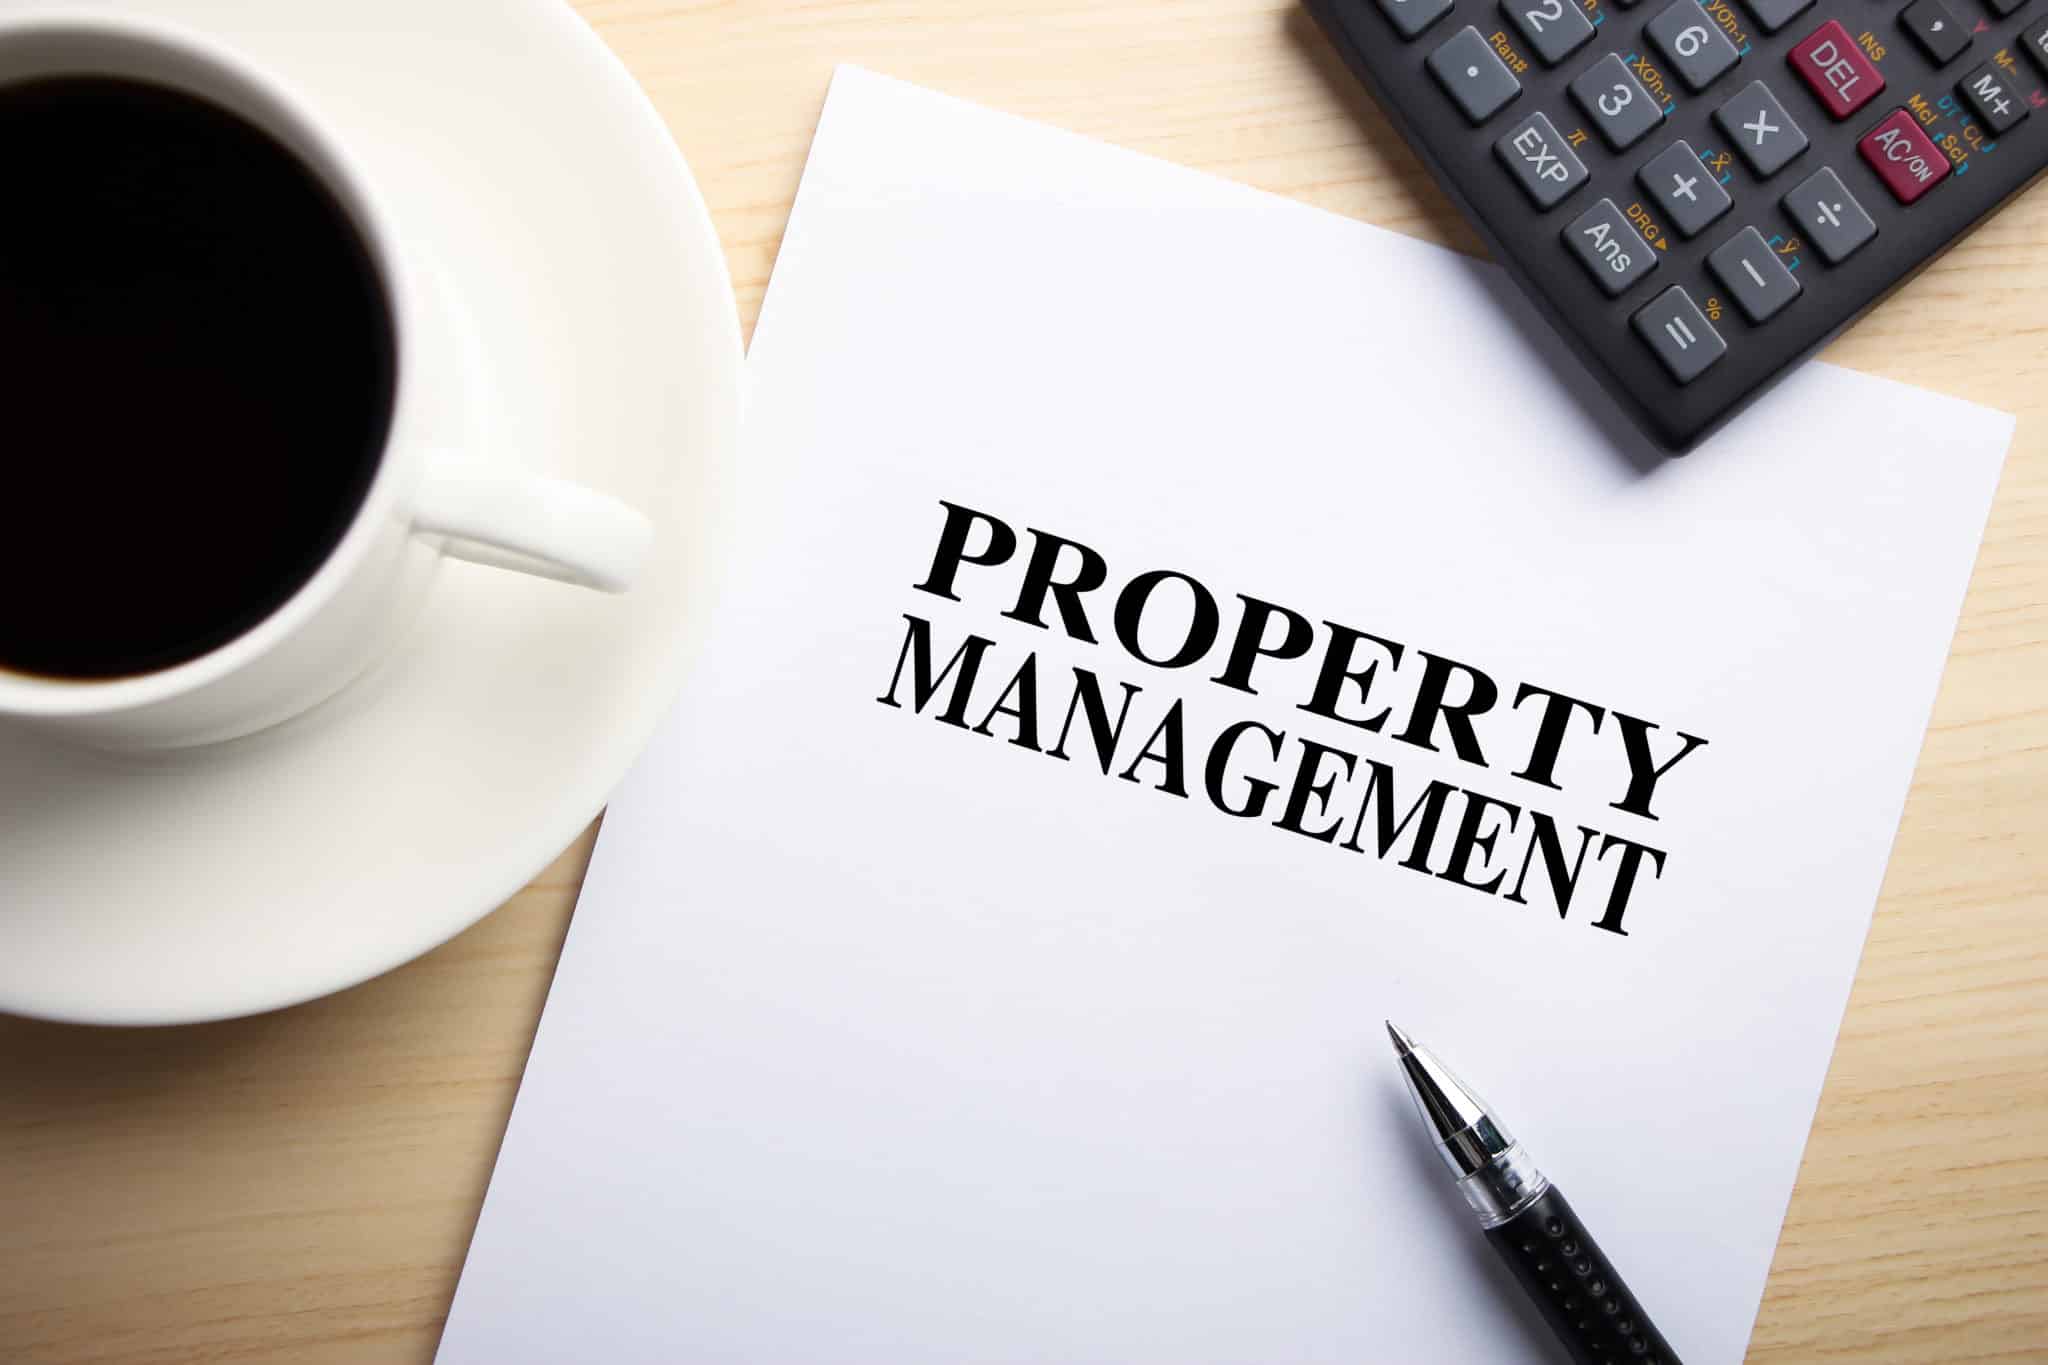 Property Management For Northern Virginia Real Estate - 10 Tips 1